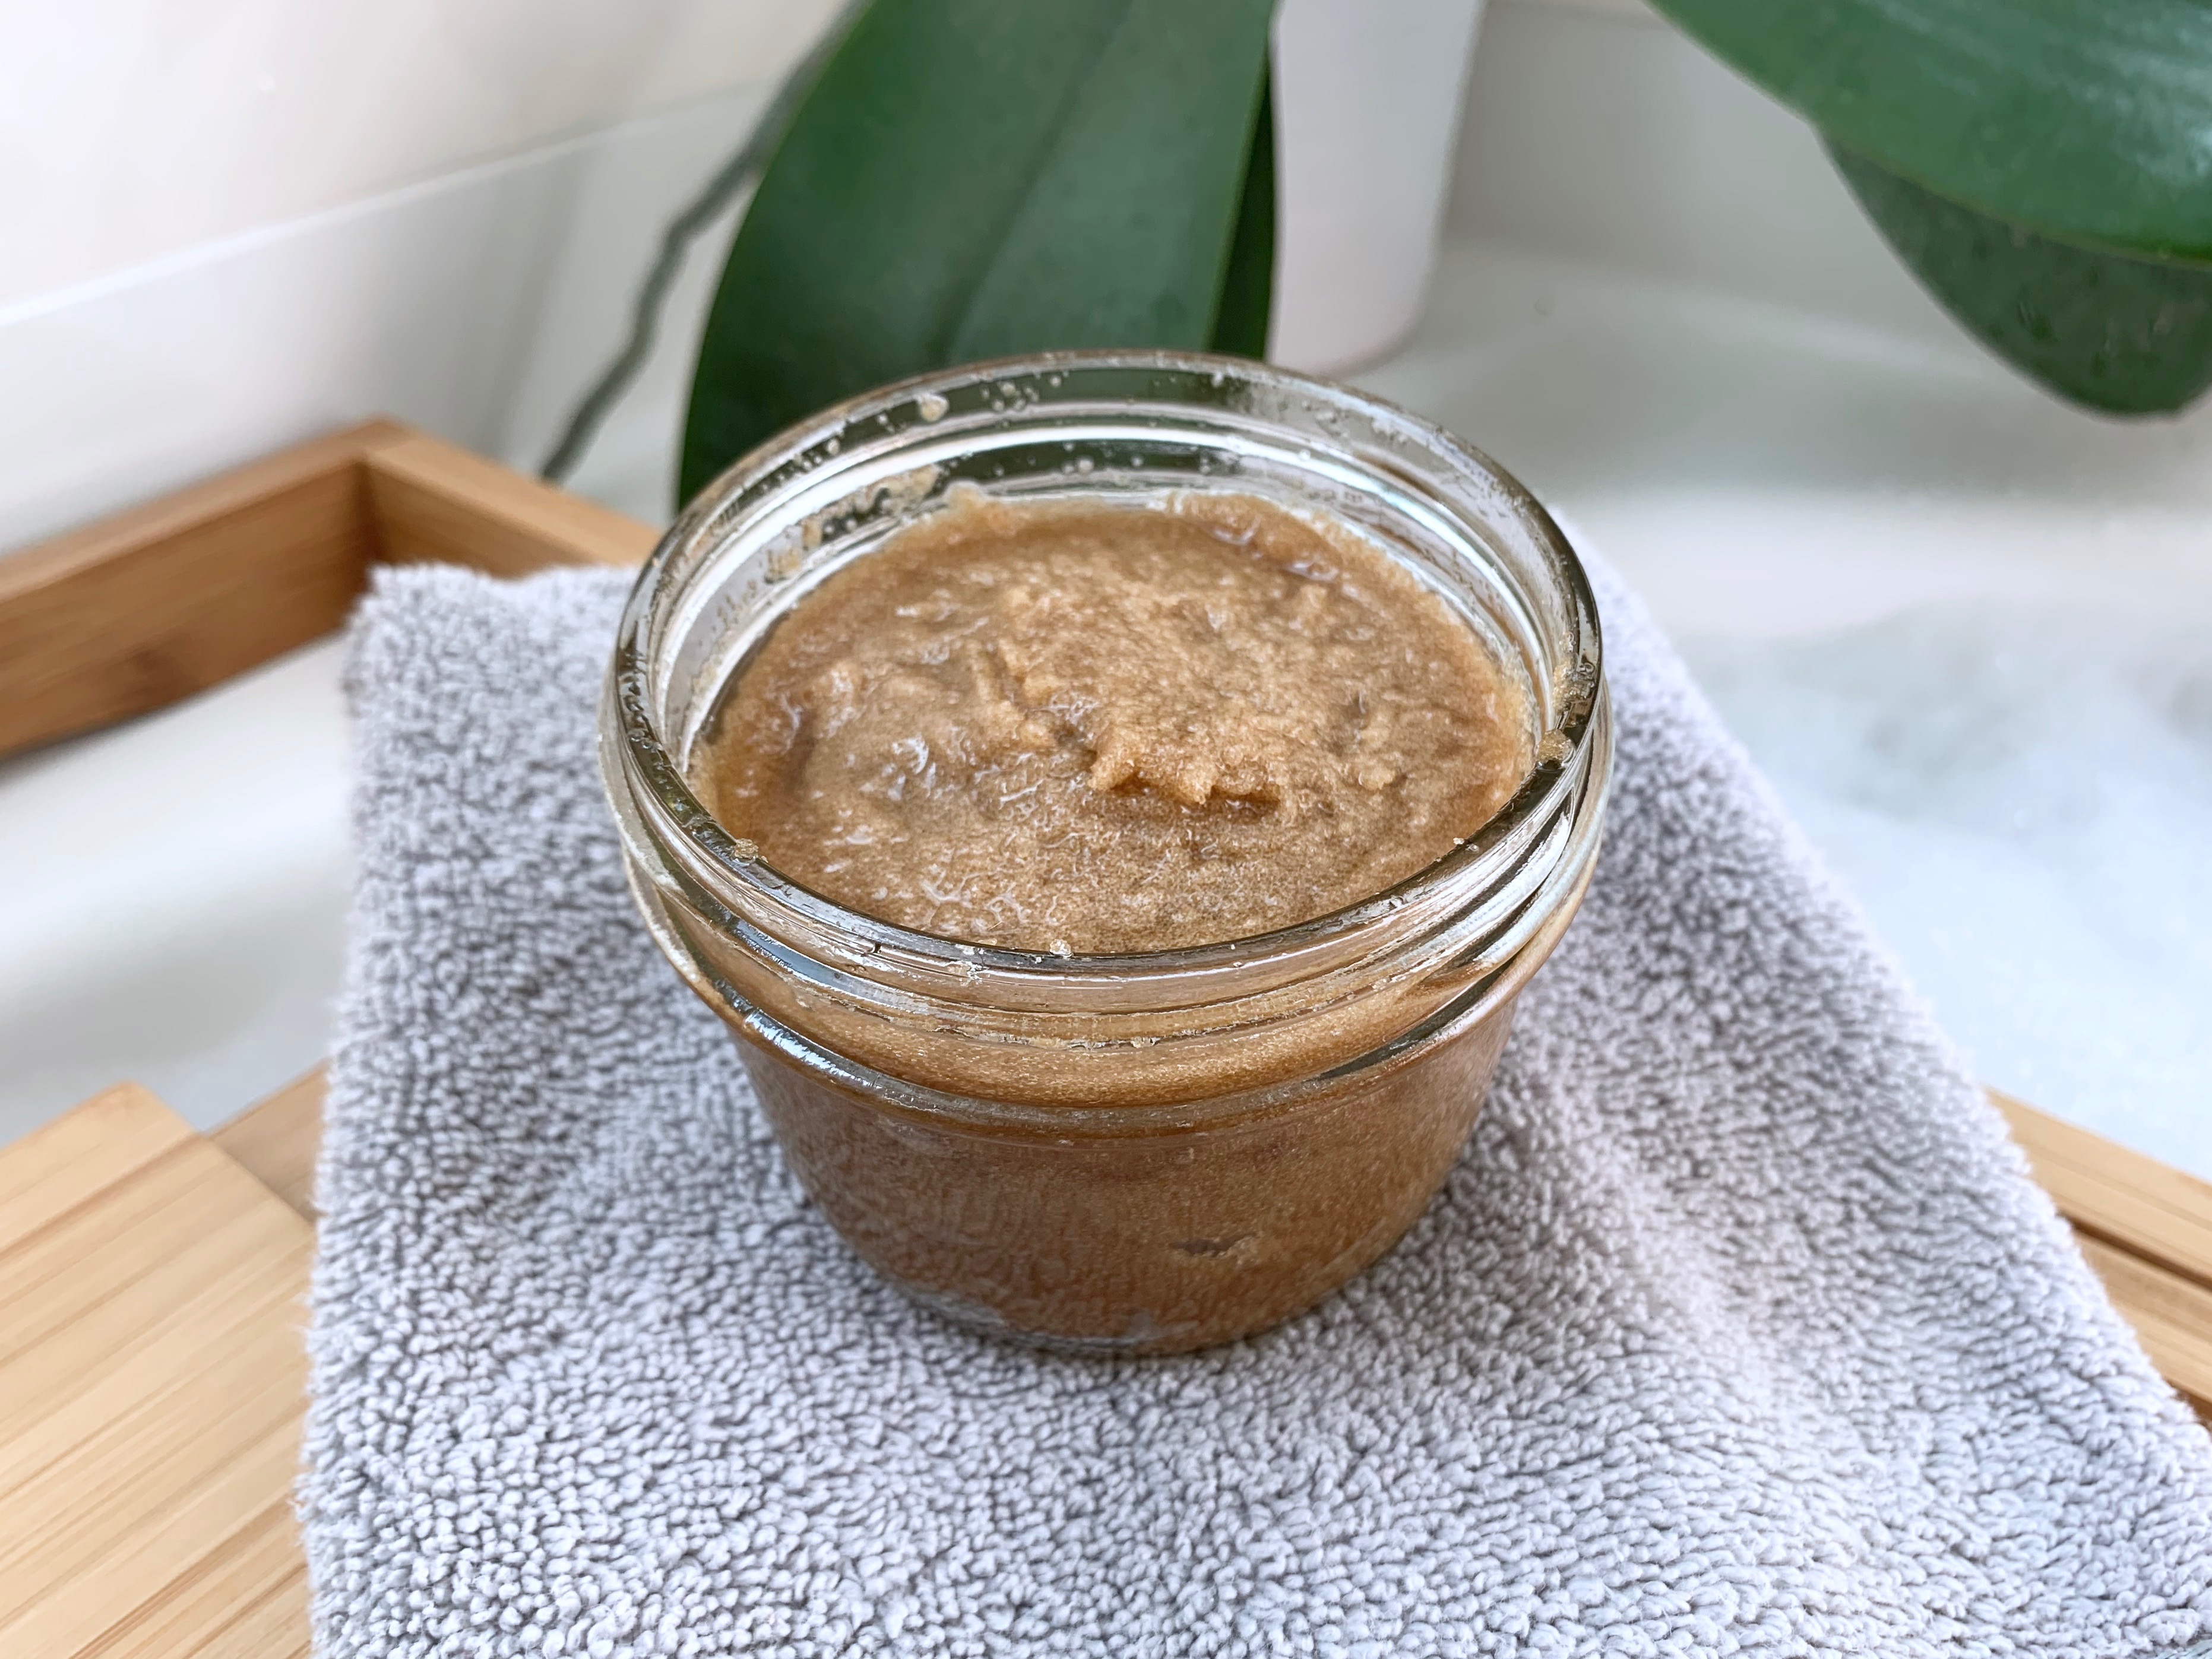 Find out how to make this super easy lavender sugar scrub. This sugar scrub has coconut oil, which is super nourishing for your skin, and brown sugar to help exfoliate. Lavender essential oil makes this scrub smell amazing and is a perfect way to help you relax and reduce stress. #DIY #DIYideas #bath #skincare #bodyscrub #sugarscrub #coconutoil #brownsugar #lavender #exfoliating